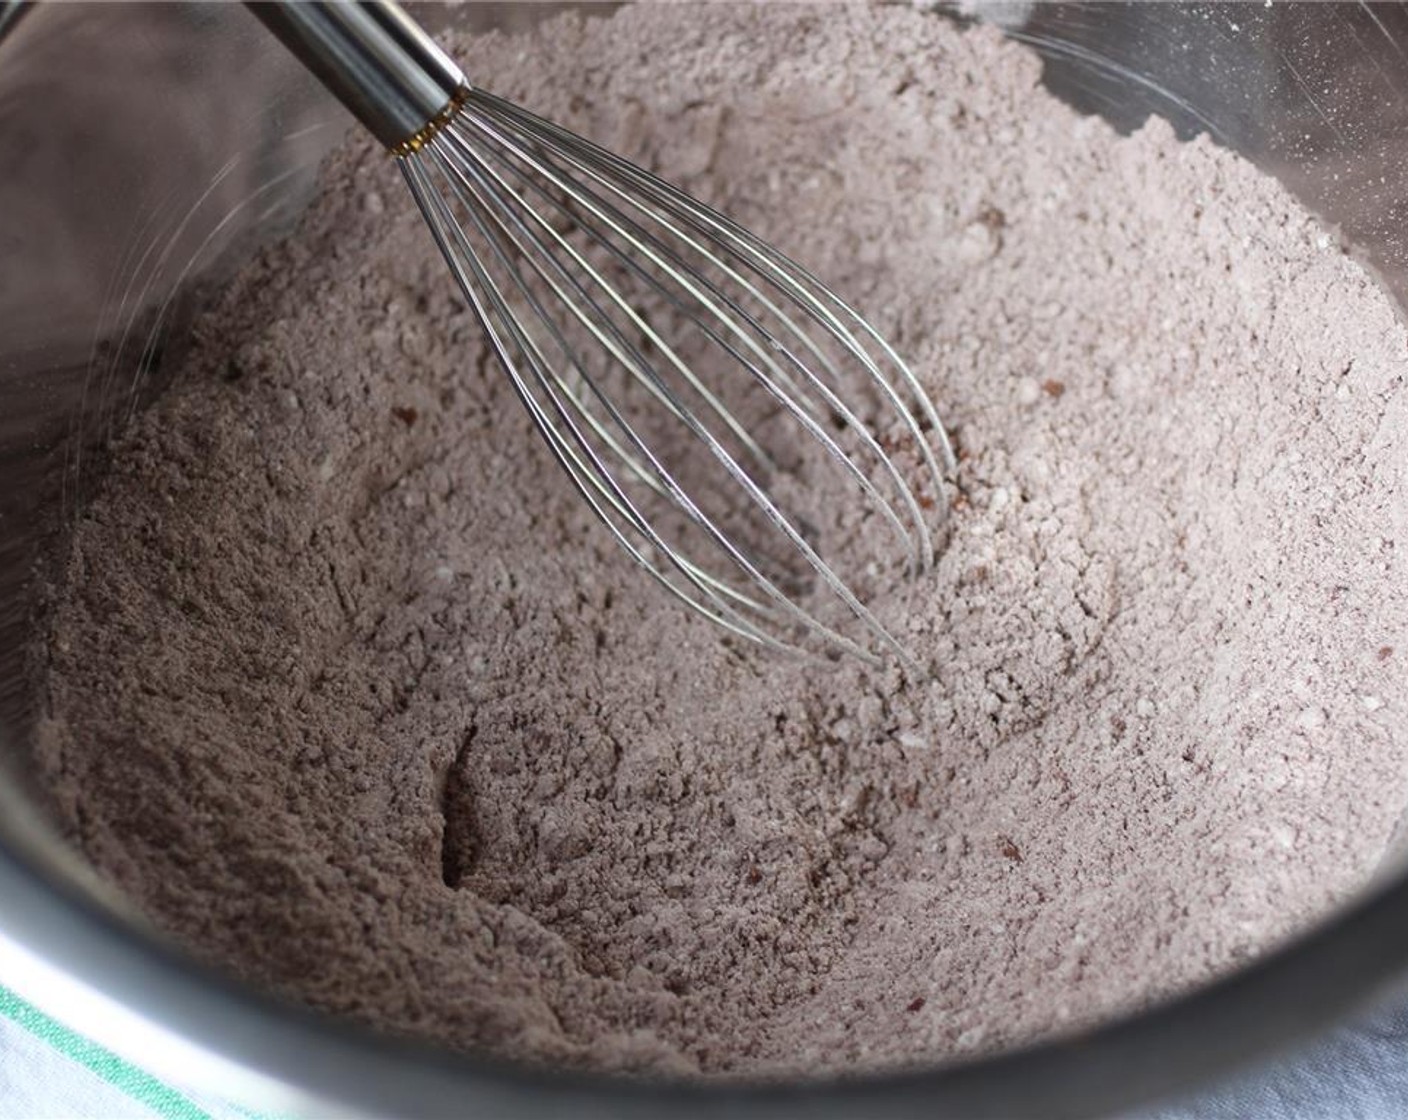 step 4 In a large bowl, mix the Whole Wheat Flour (1 1/2 cups), Baking Soda (3/4 tsp), Salt (3/4 tsp), and Unsweetened Cocoa Powder (1/3 cup) together.